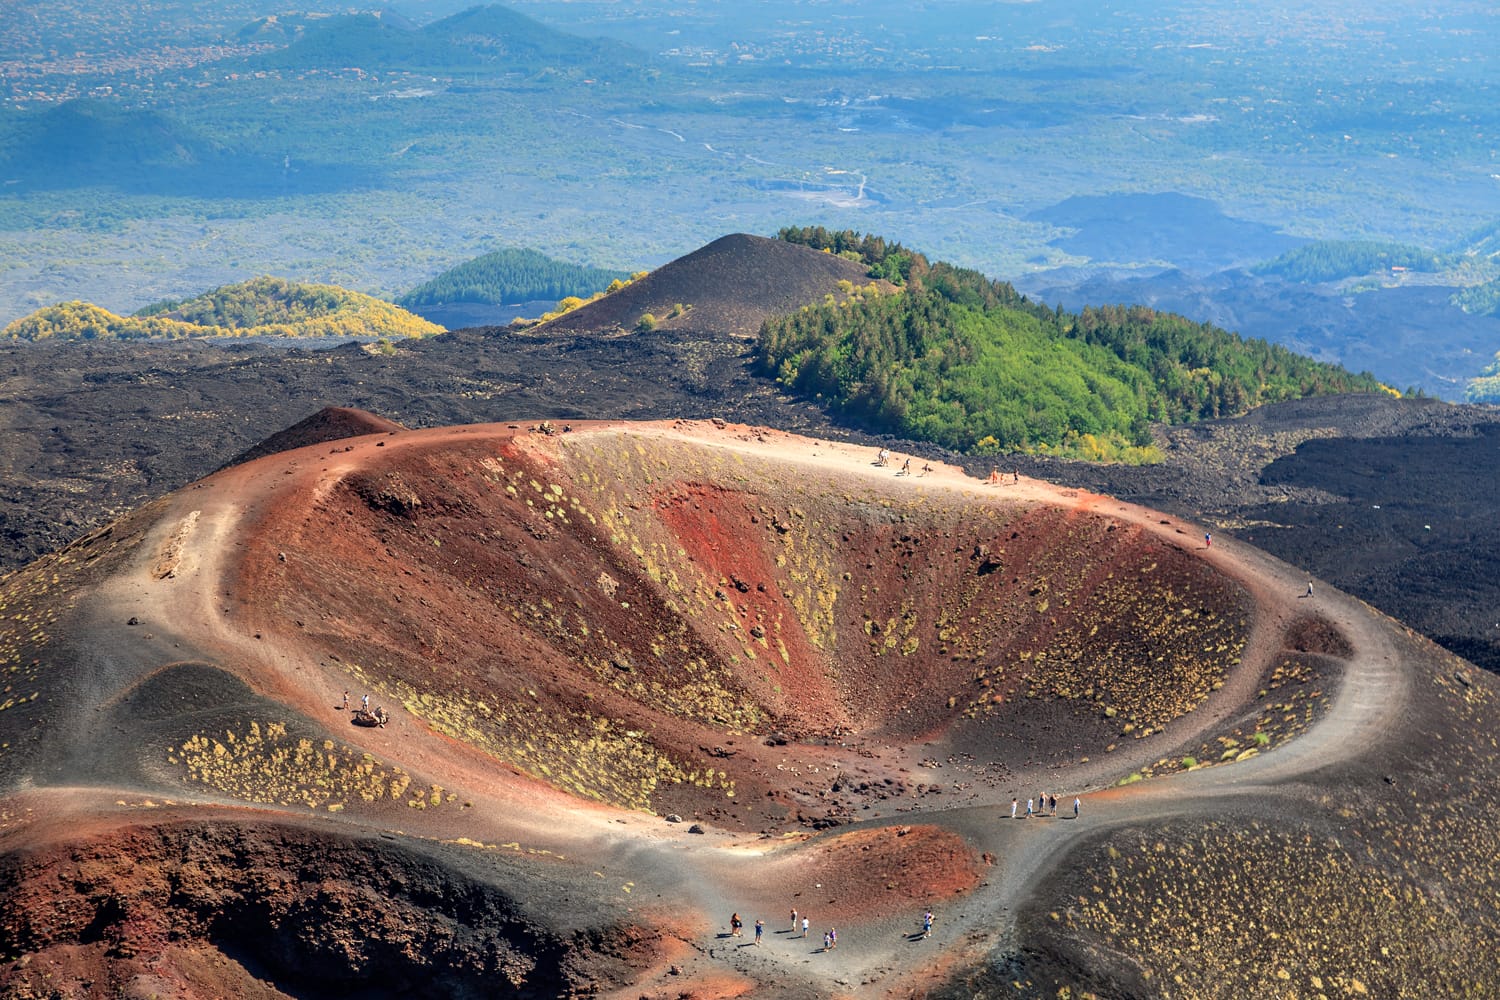 Collapsed volcano cone, Mount Etna, Sicily, Italy